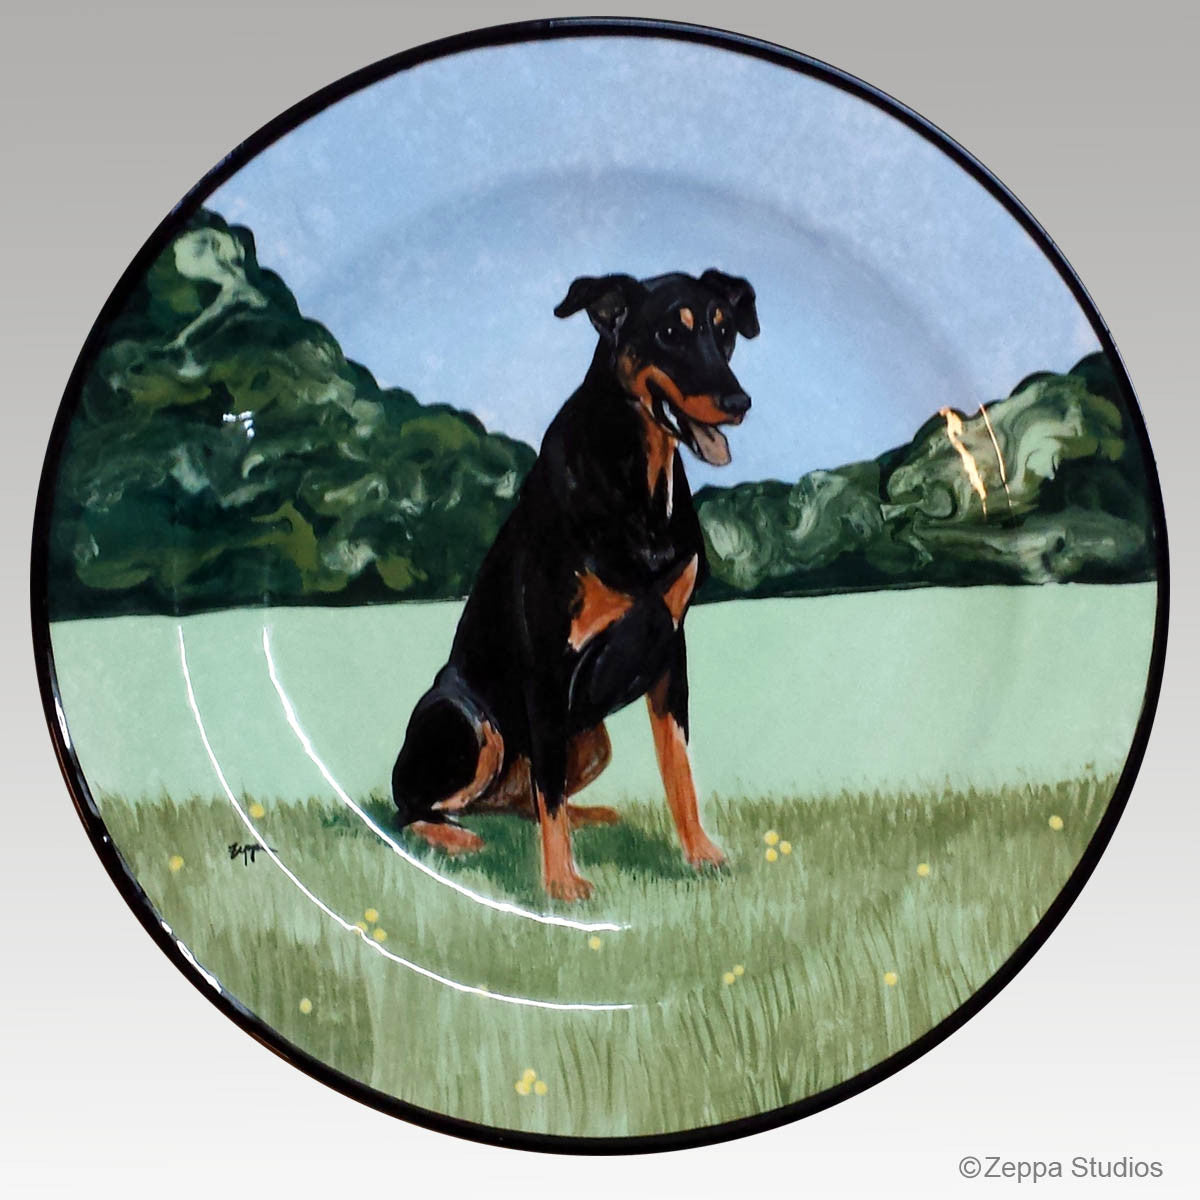 Gallery Style Hand Painted 11 inch Plate - Doberman